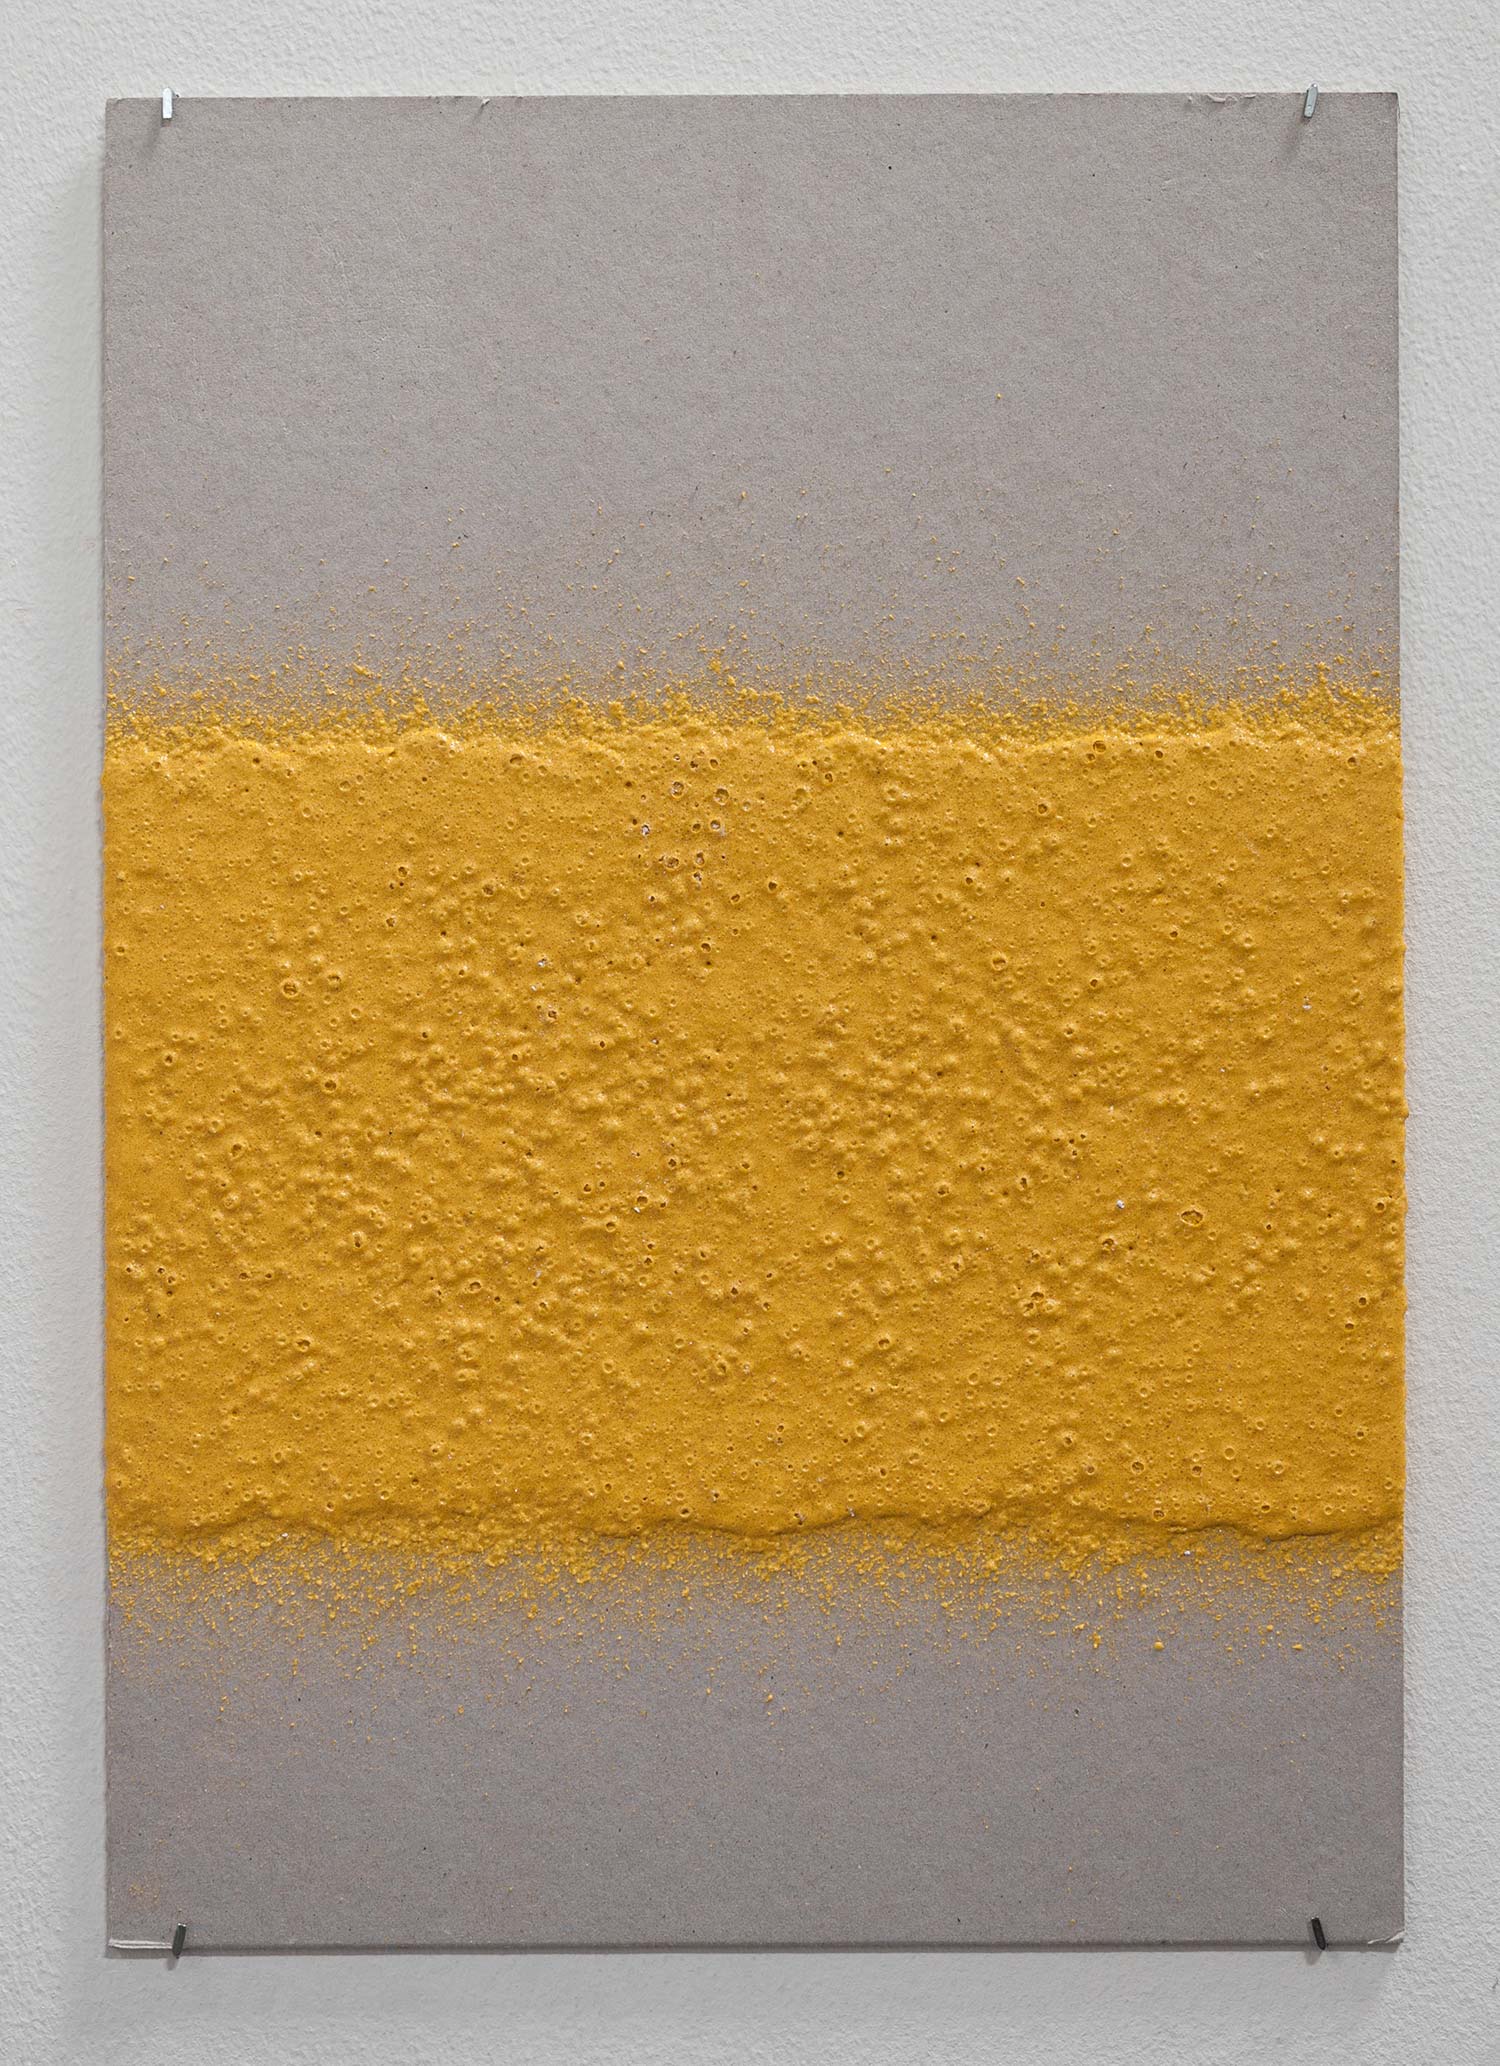   200mm (W), 1.5mm (T), Yellow, edge line (613), machine marking, remarking, D83 Nad Al Hamar, LP 10,  2017  Thermoplastic paint and reflective glass particles on grey board  35 x 50 cm 